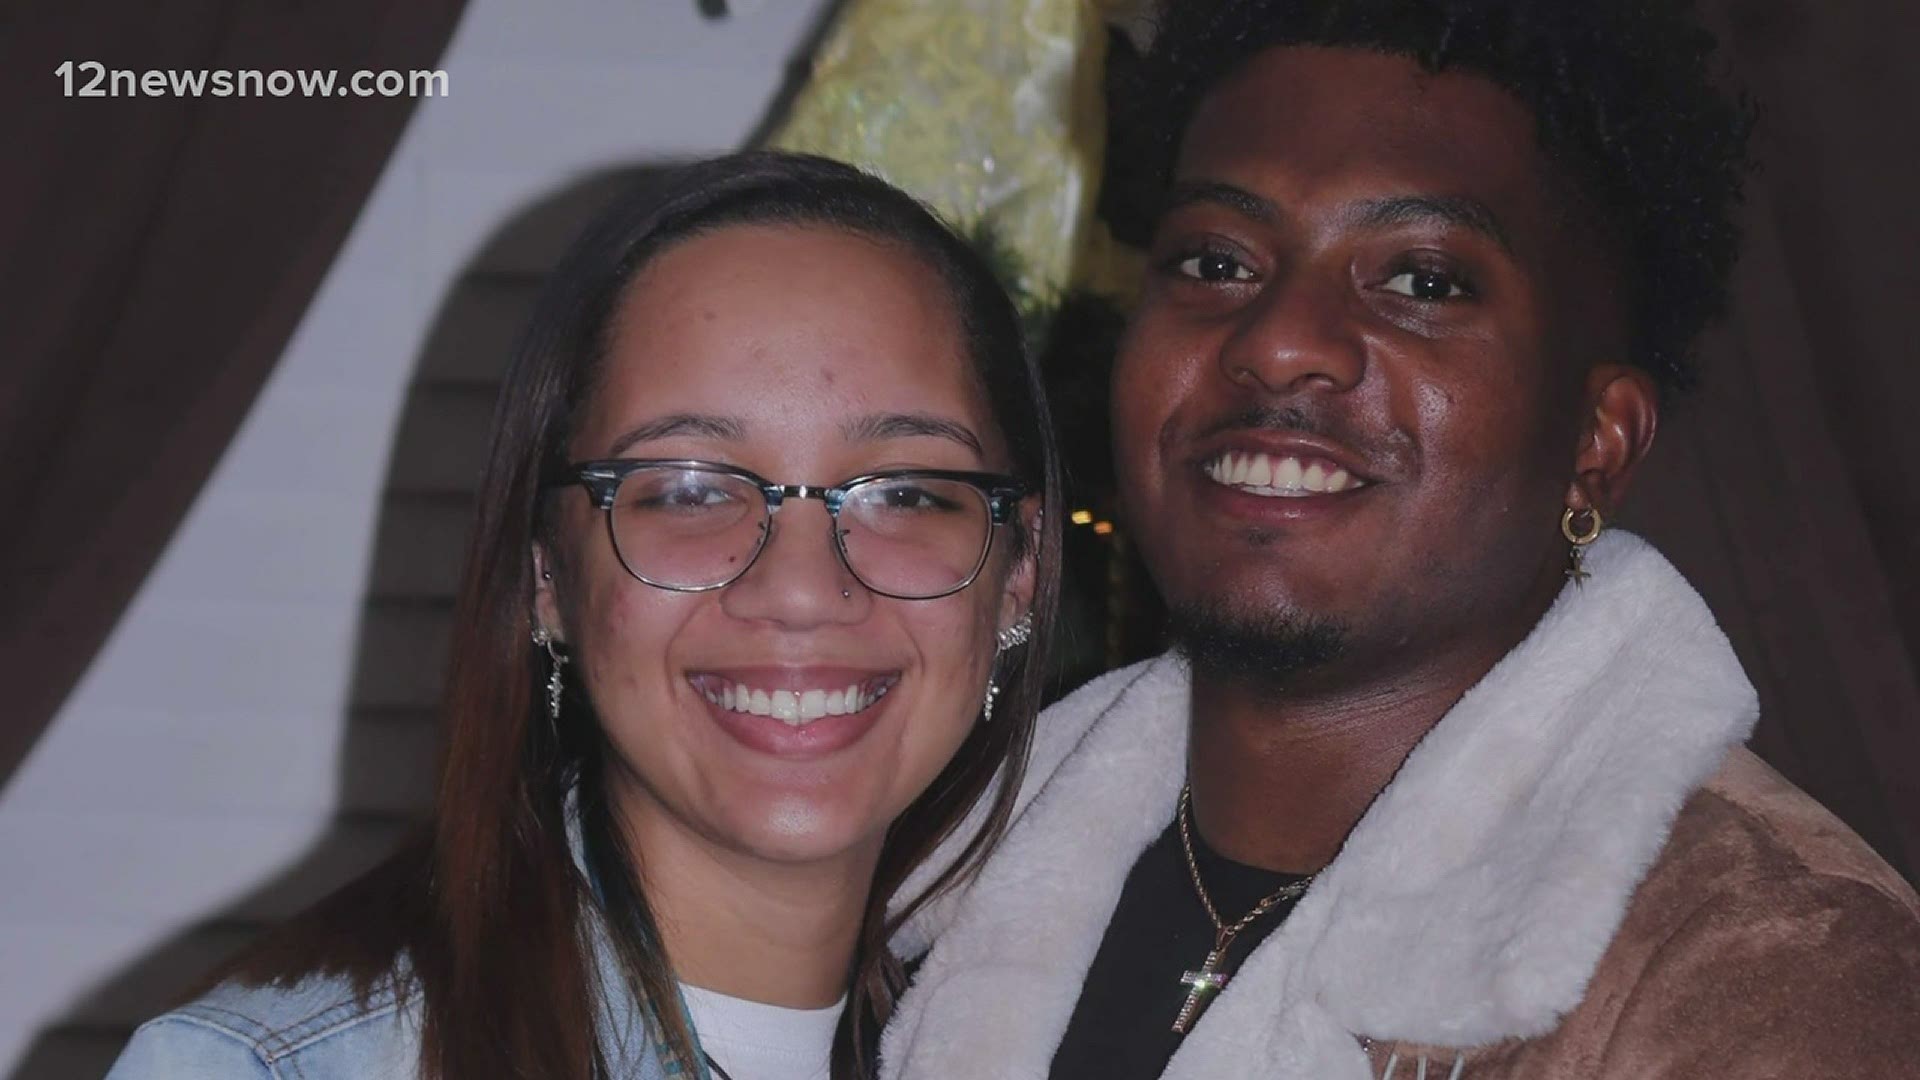 Relatives are remembering a young couple killed over the weekend in Orange. Someone shot and killed Aaliyah Grandigo, 18, and Thalamus Livings, 23.